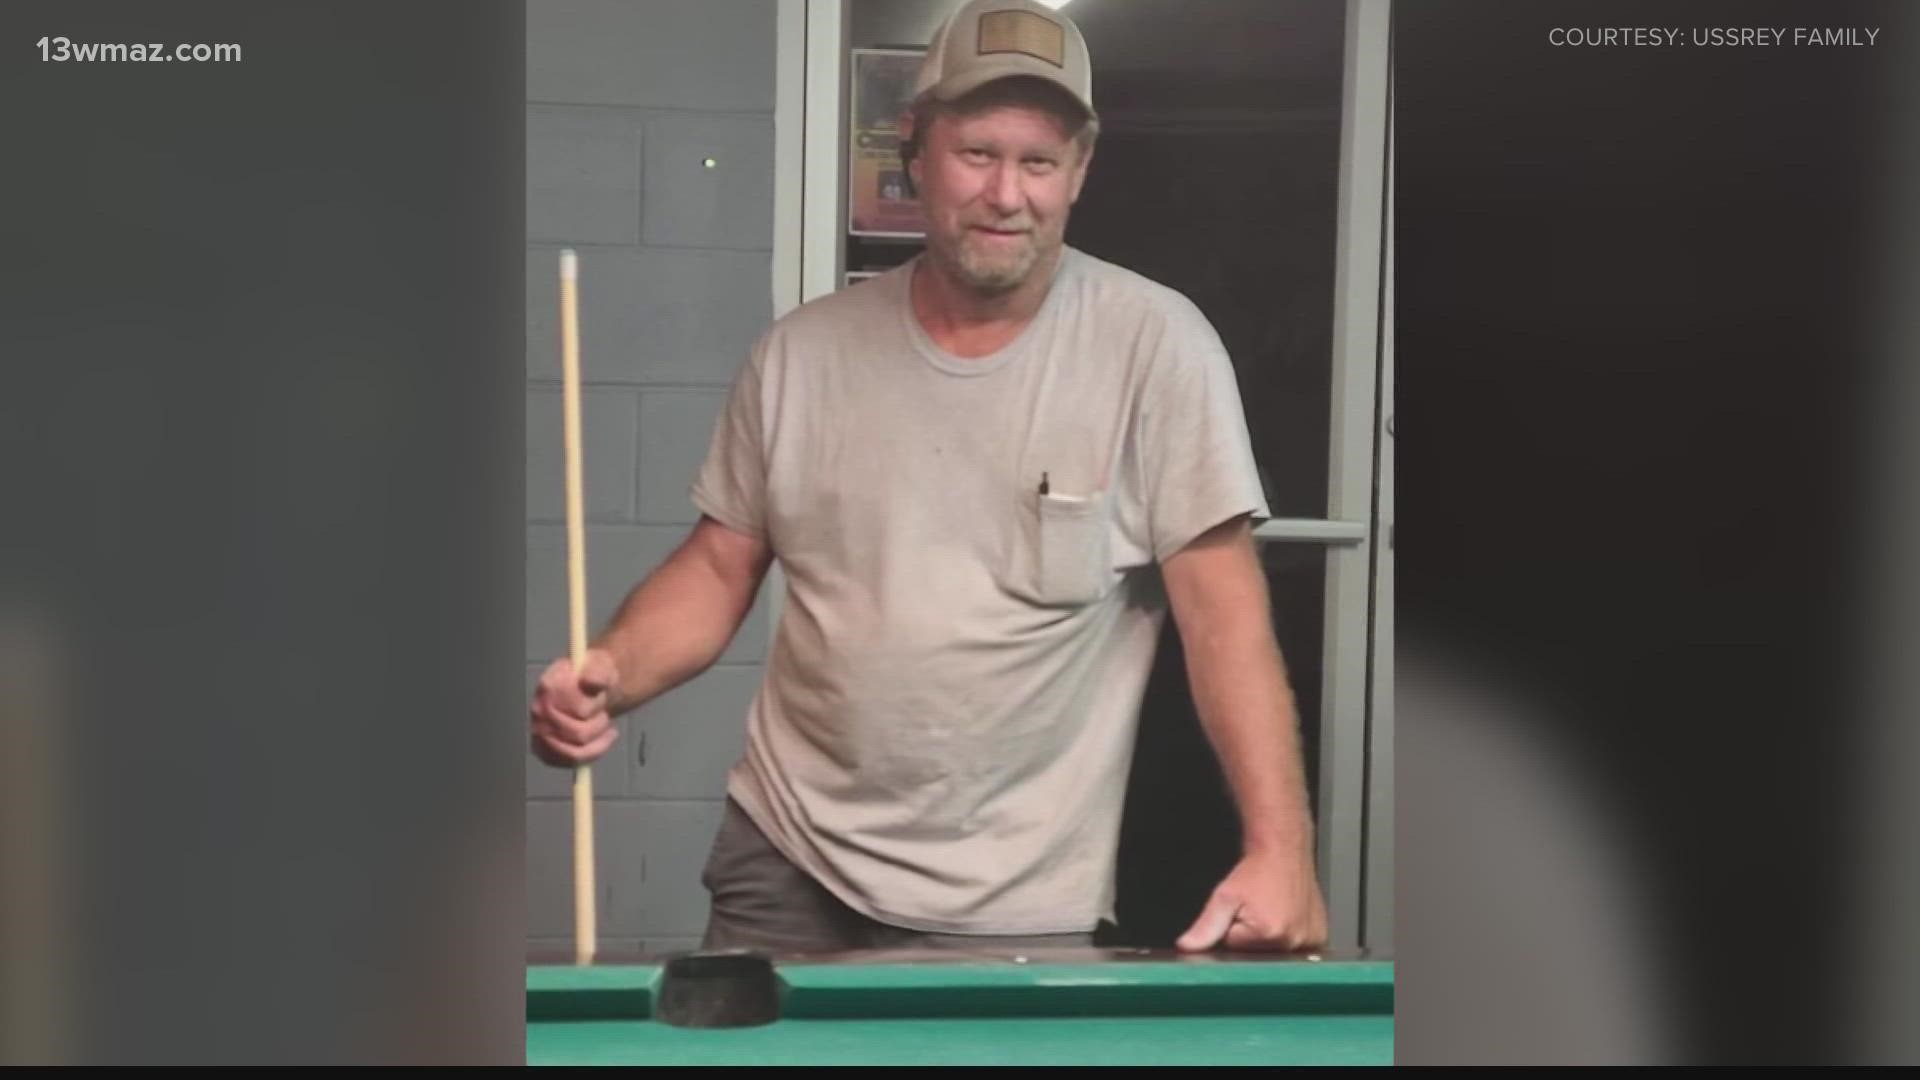 A Dodge County man's family says they're in disbelief after he was allegedly shot and killed by their elderly neighbor.